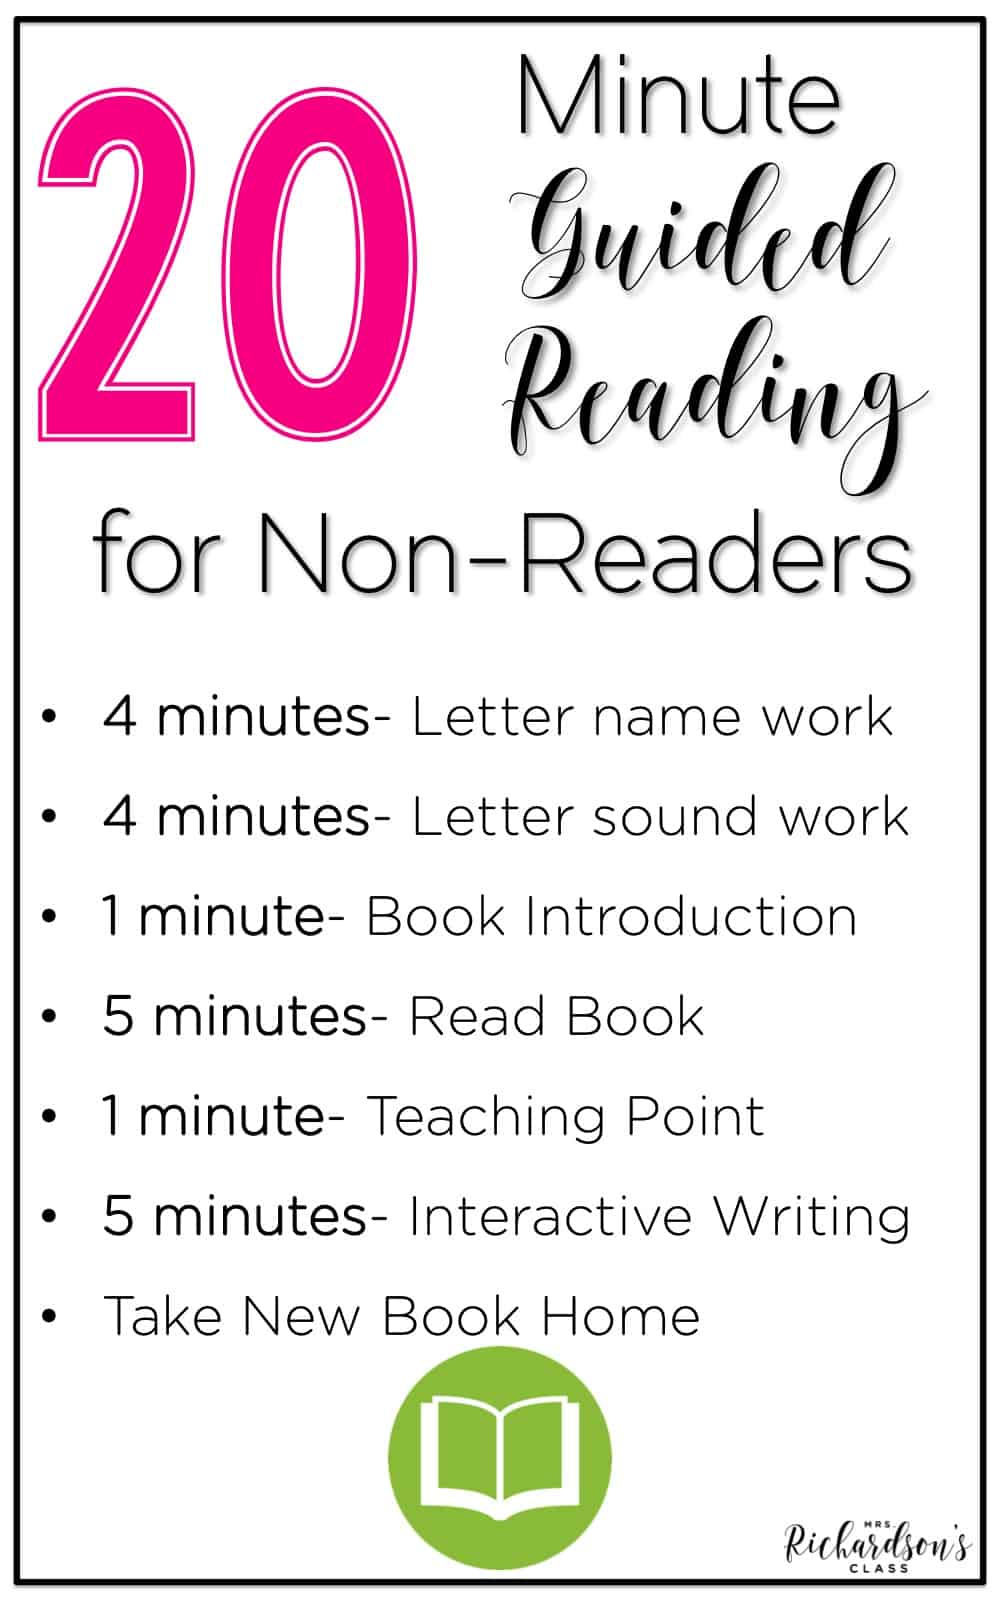 Independent Reading Level Chart